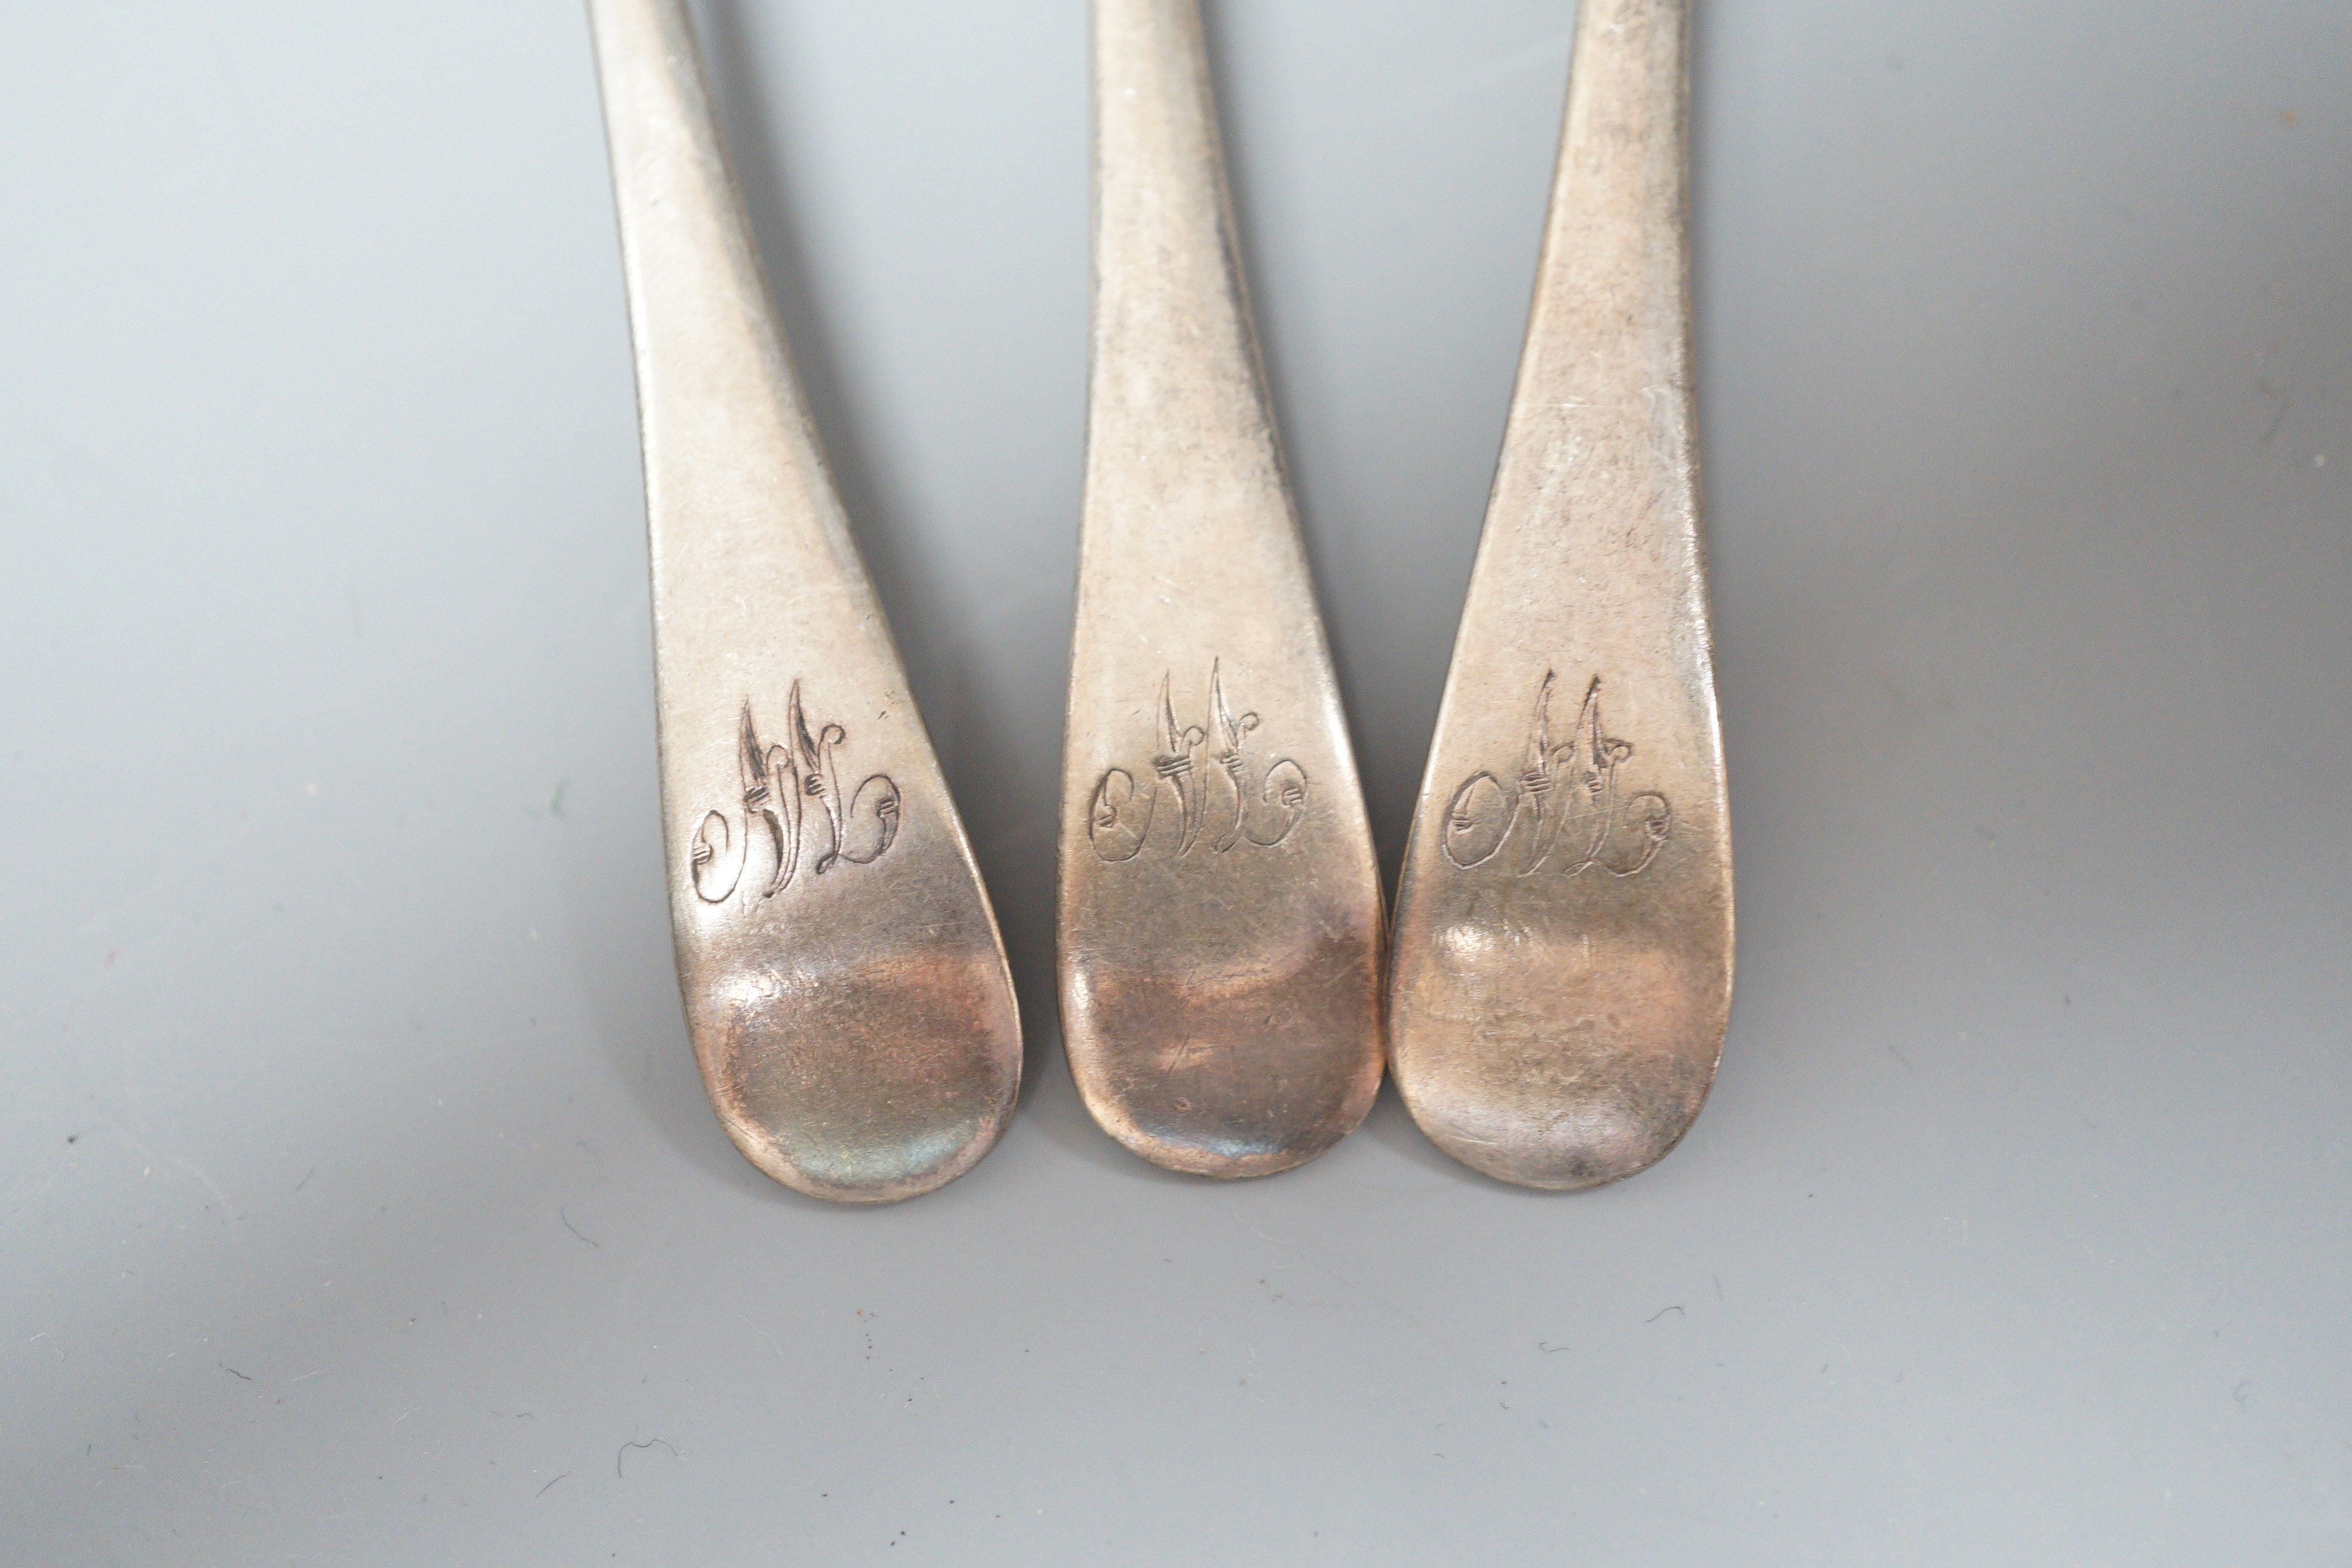 A cased set of six silver 1930's silver Old English pattern teaspoons, Mappin & Webb, Sheffield, 1936 and three other silver teaspoons.